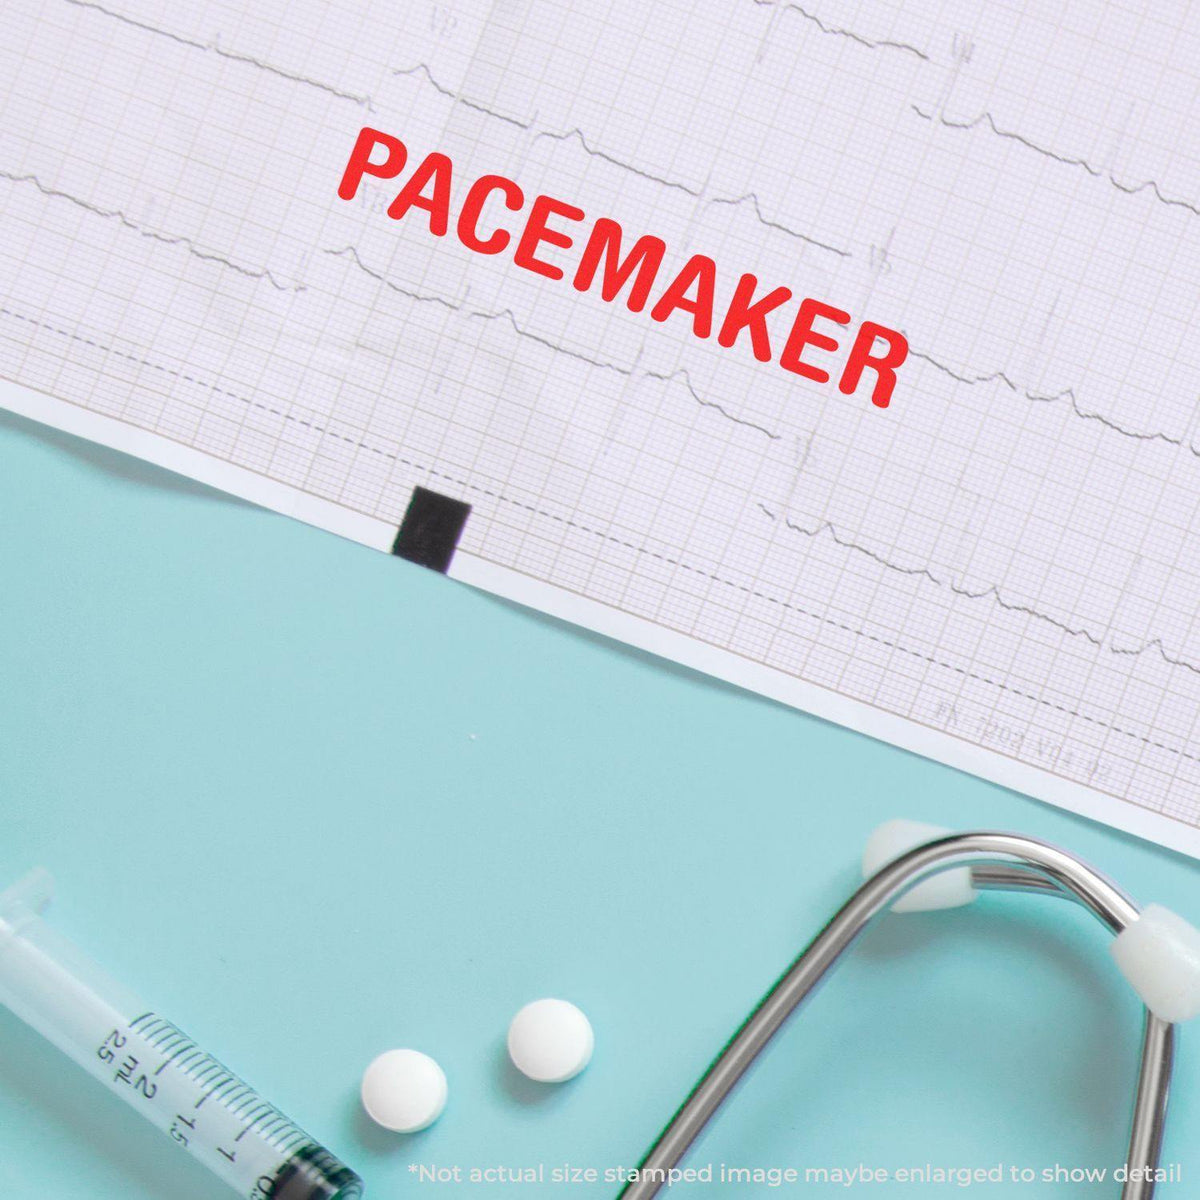 In Use Large Pacemaker Rubber Stamp Image